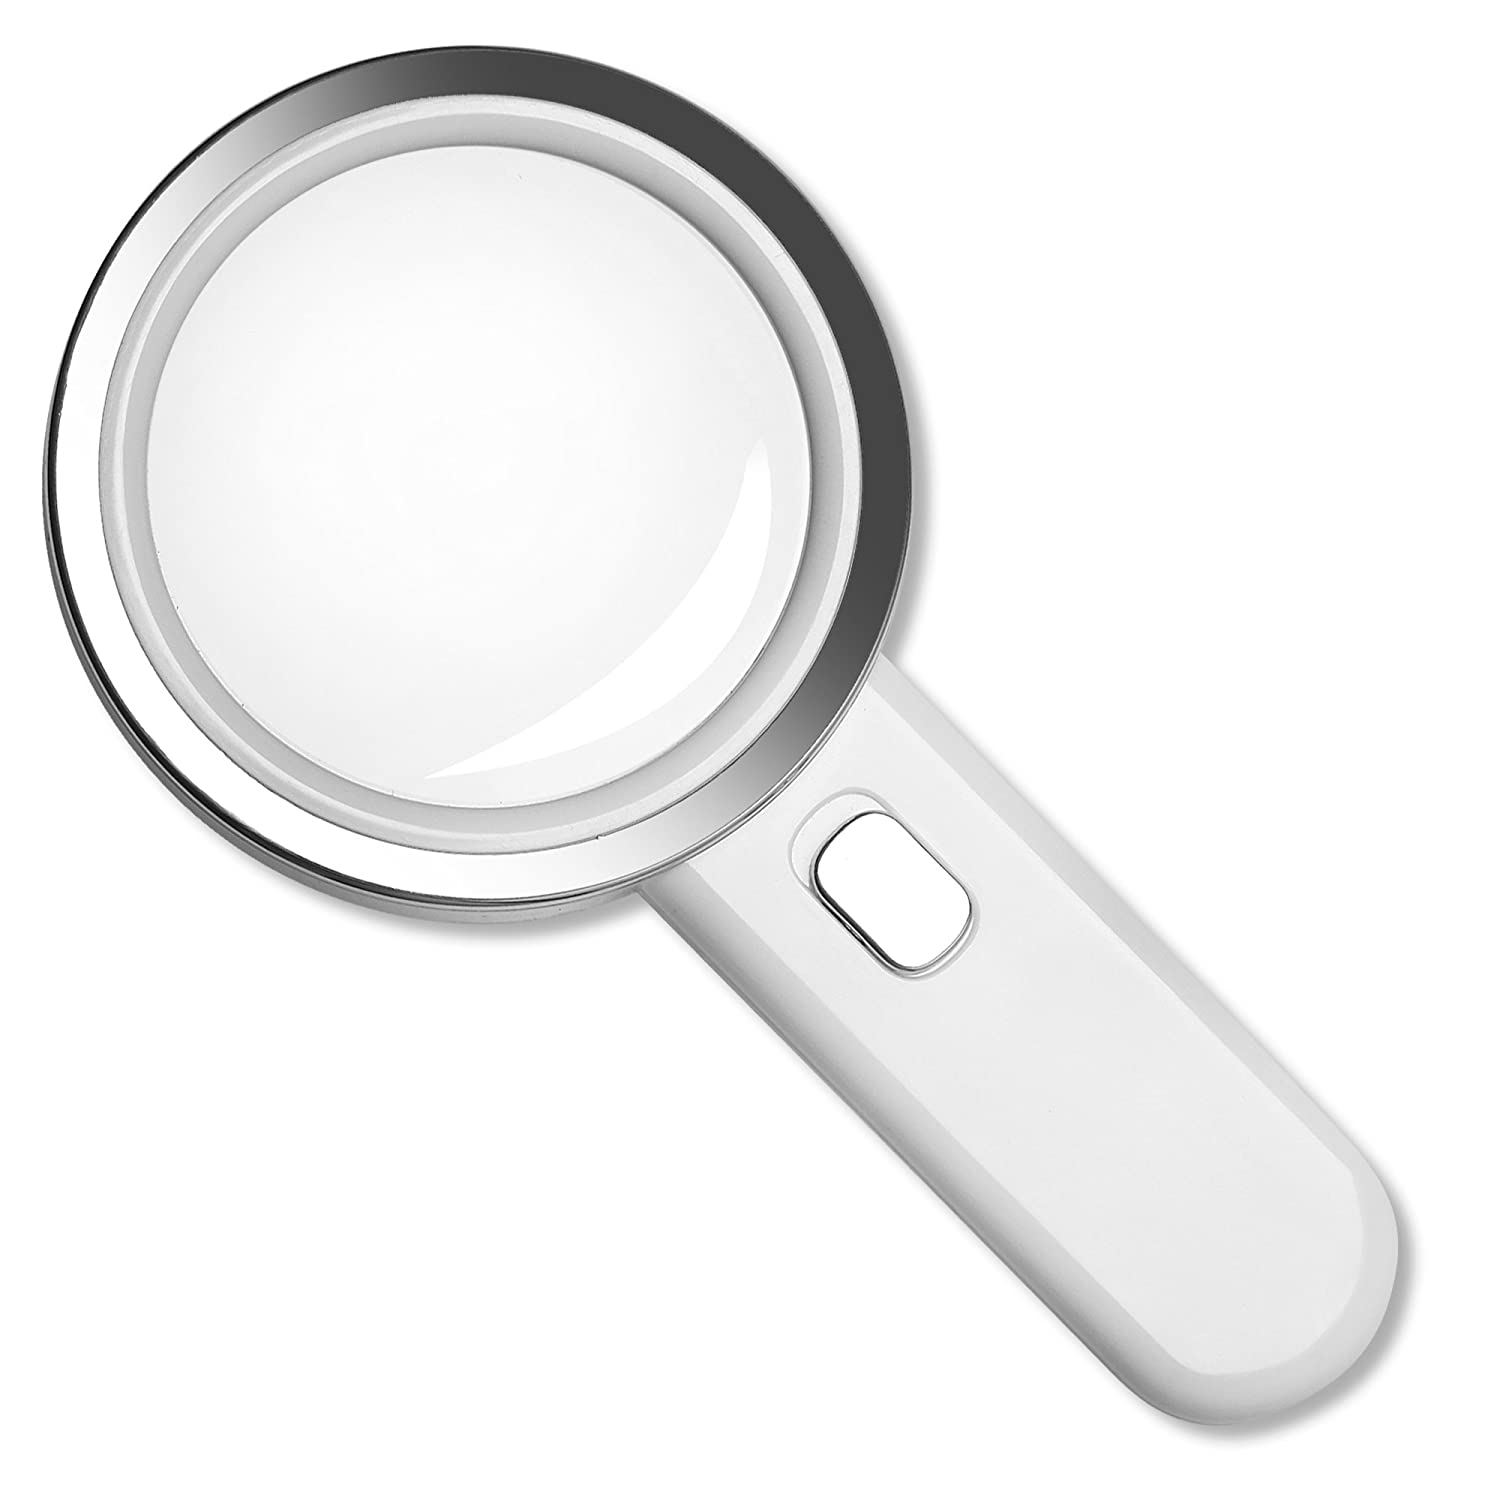 9 Best Kids Magnifying Glass 2022 - Buying Guide 8